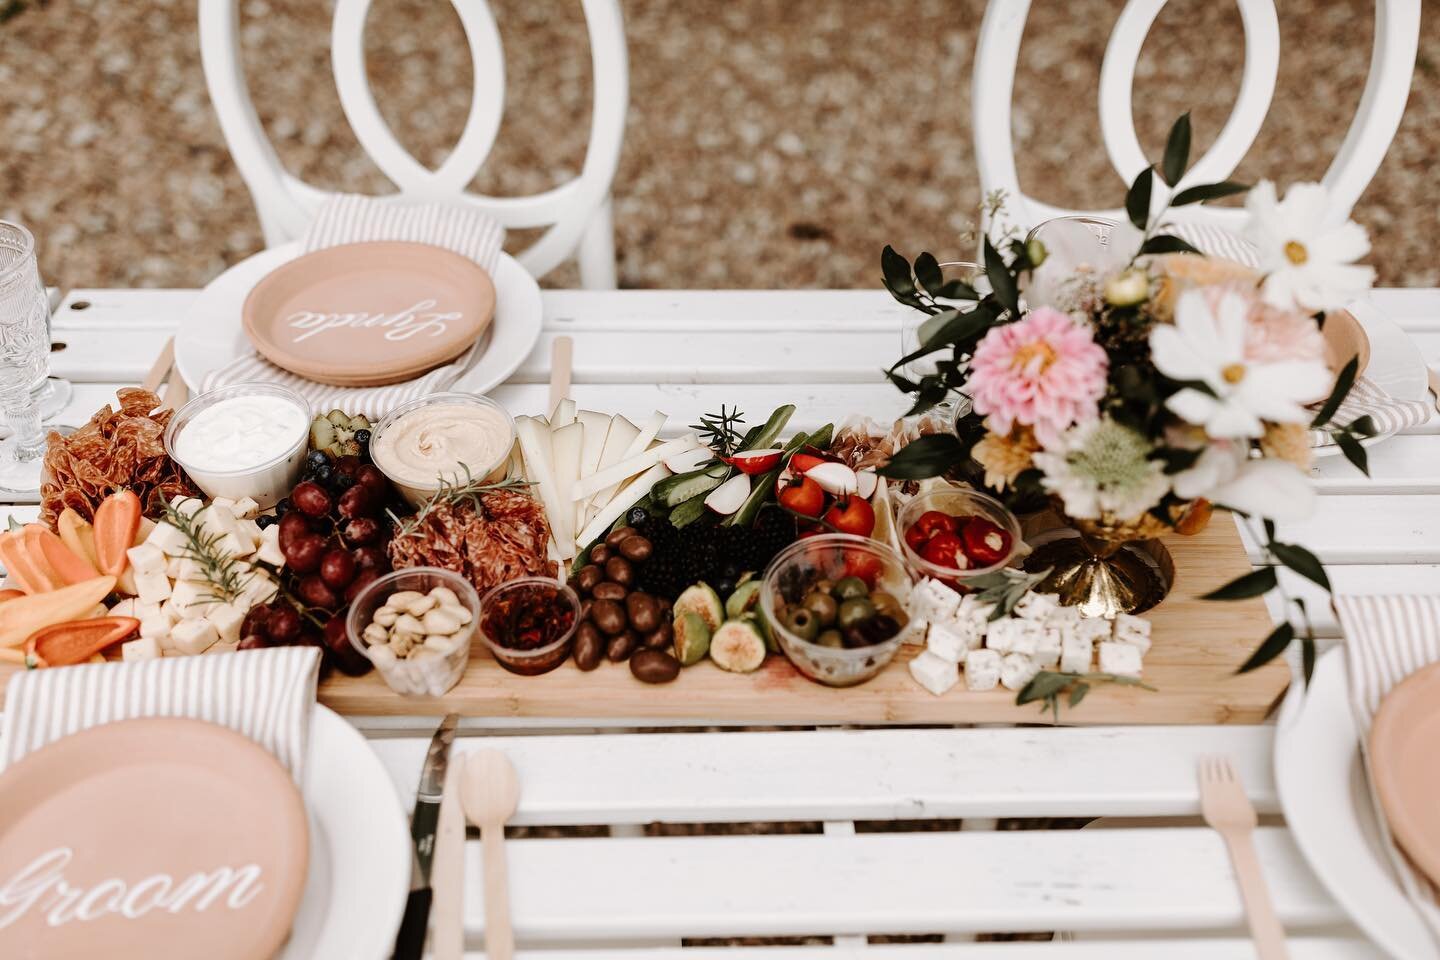 Day Four: Delicious Greek-style boards for some stunning Mediterranean-inspired elopements put together by the talented @laurachapmanevents✨⁣⁣
⁣⁣
Planning &amp; Design: @laurachapmanevents⁣⁣
Lead Photographer: @parkphotoco⁣⁣
Second Photographer: @dan